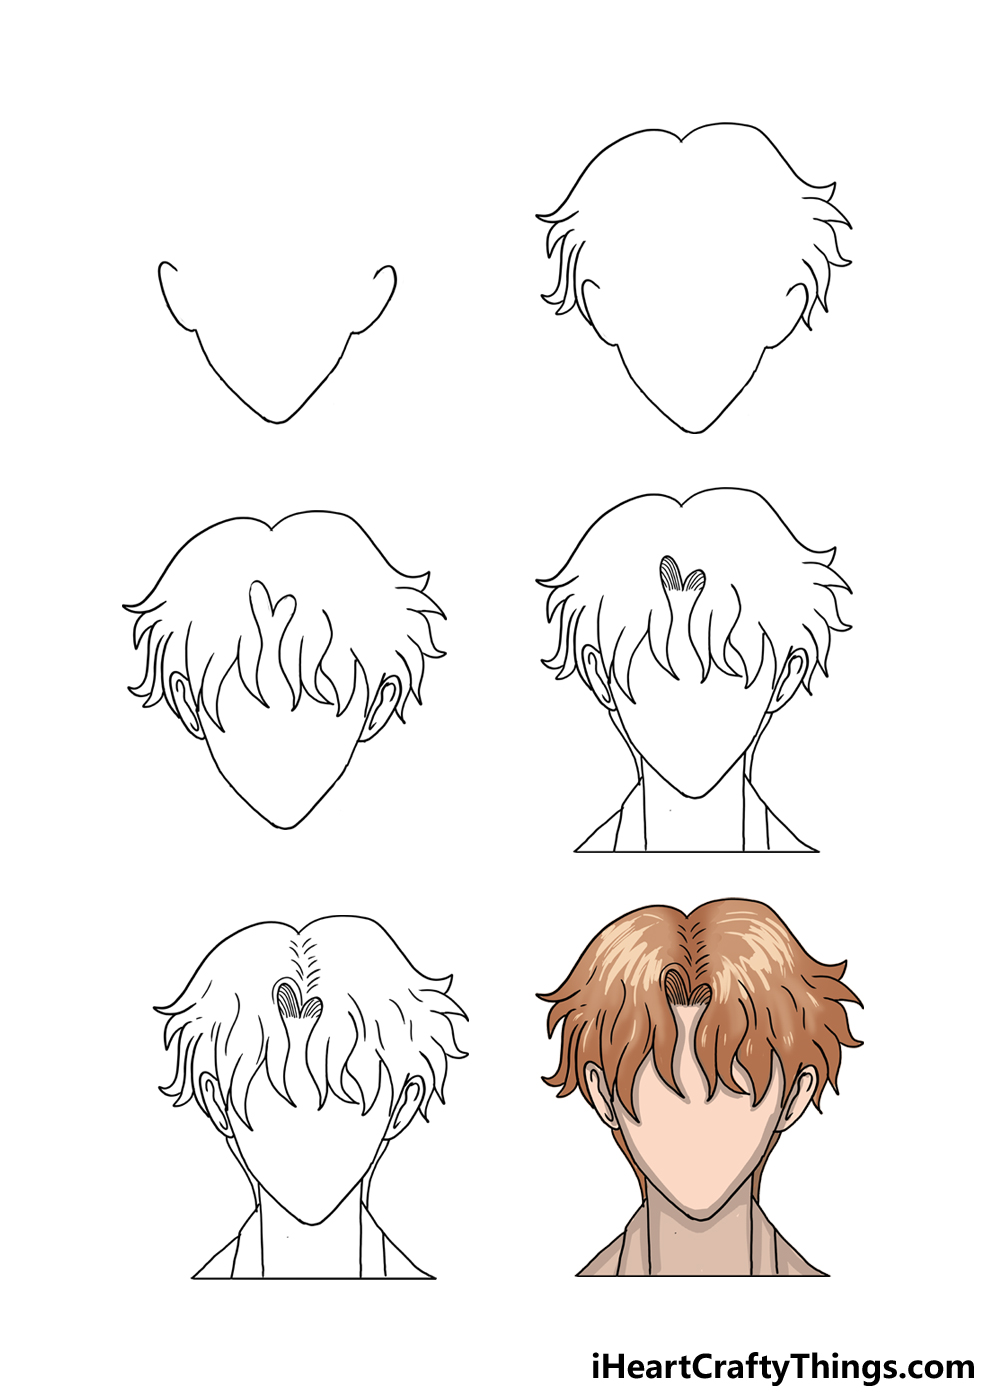 1257 Boy Hairstyles Anime Hairstyles Images Stock Photos  Vectors   Shutterstock